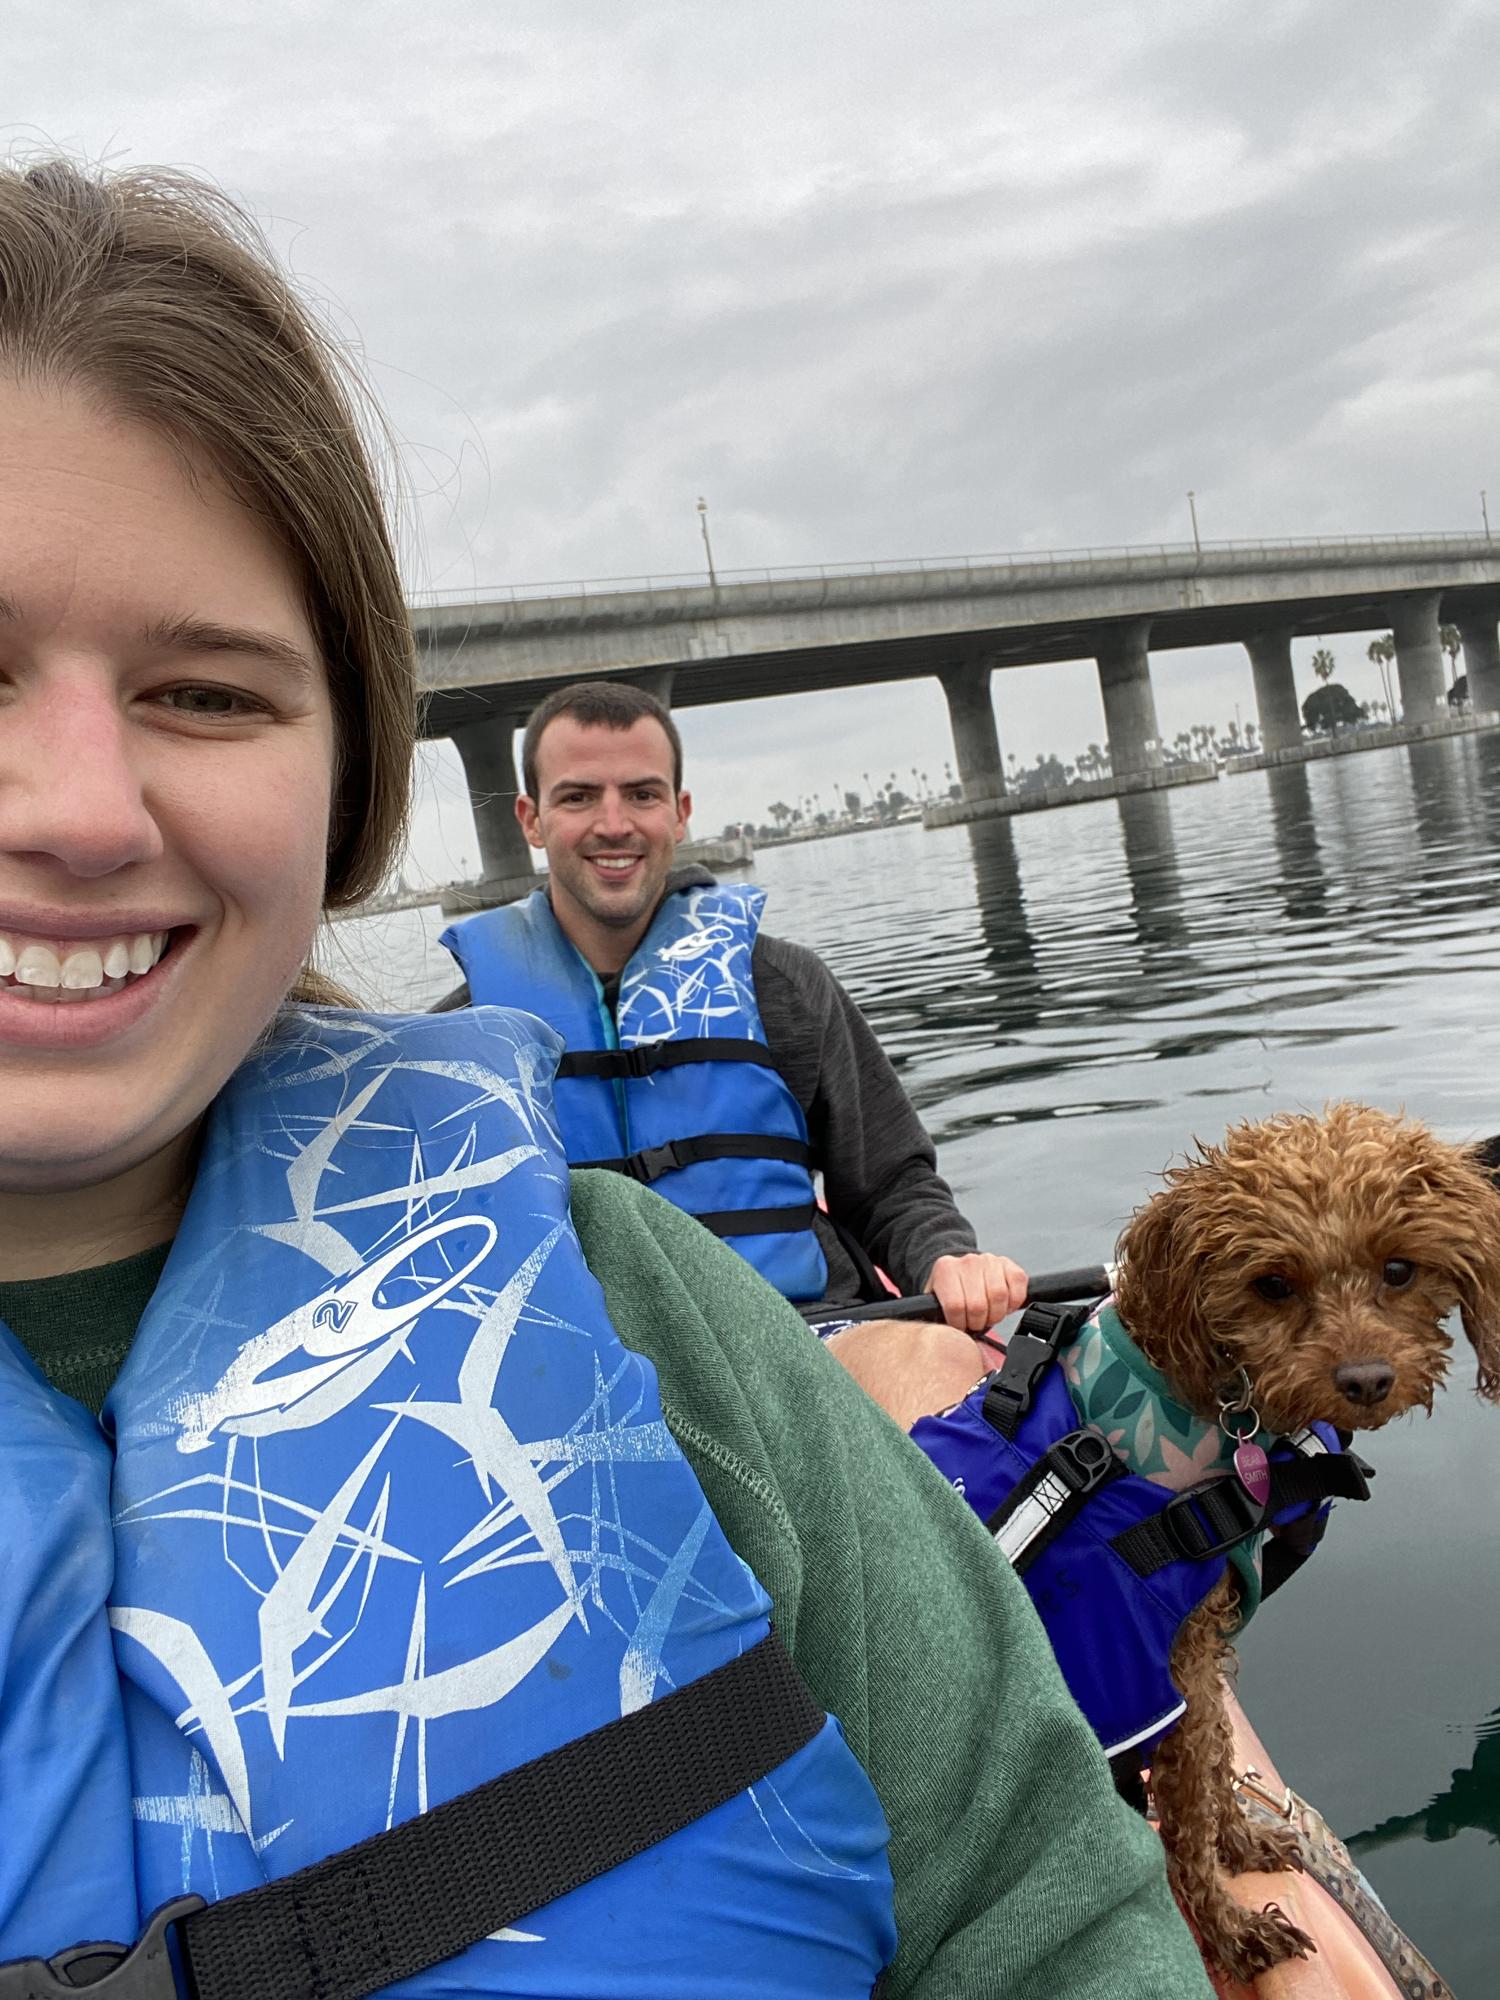 Our first flight together was a trip to (not so sunny) San Diego, where we took Bear to the beach for her first time, and kayaked to a dog park island!